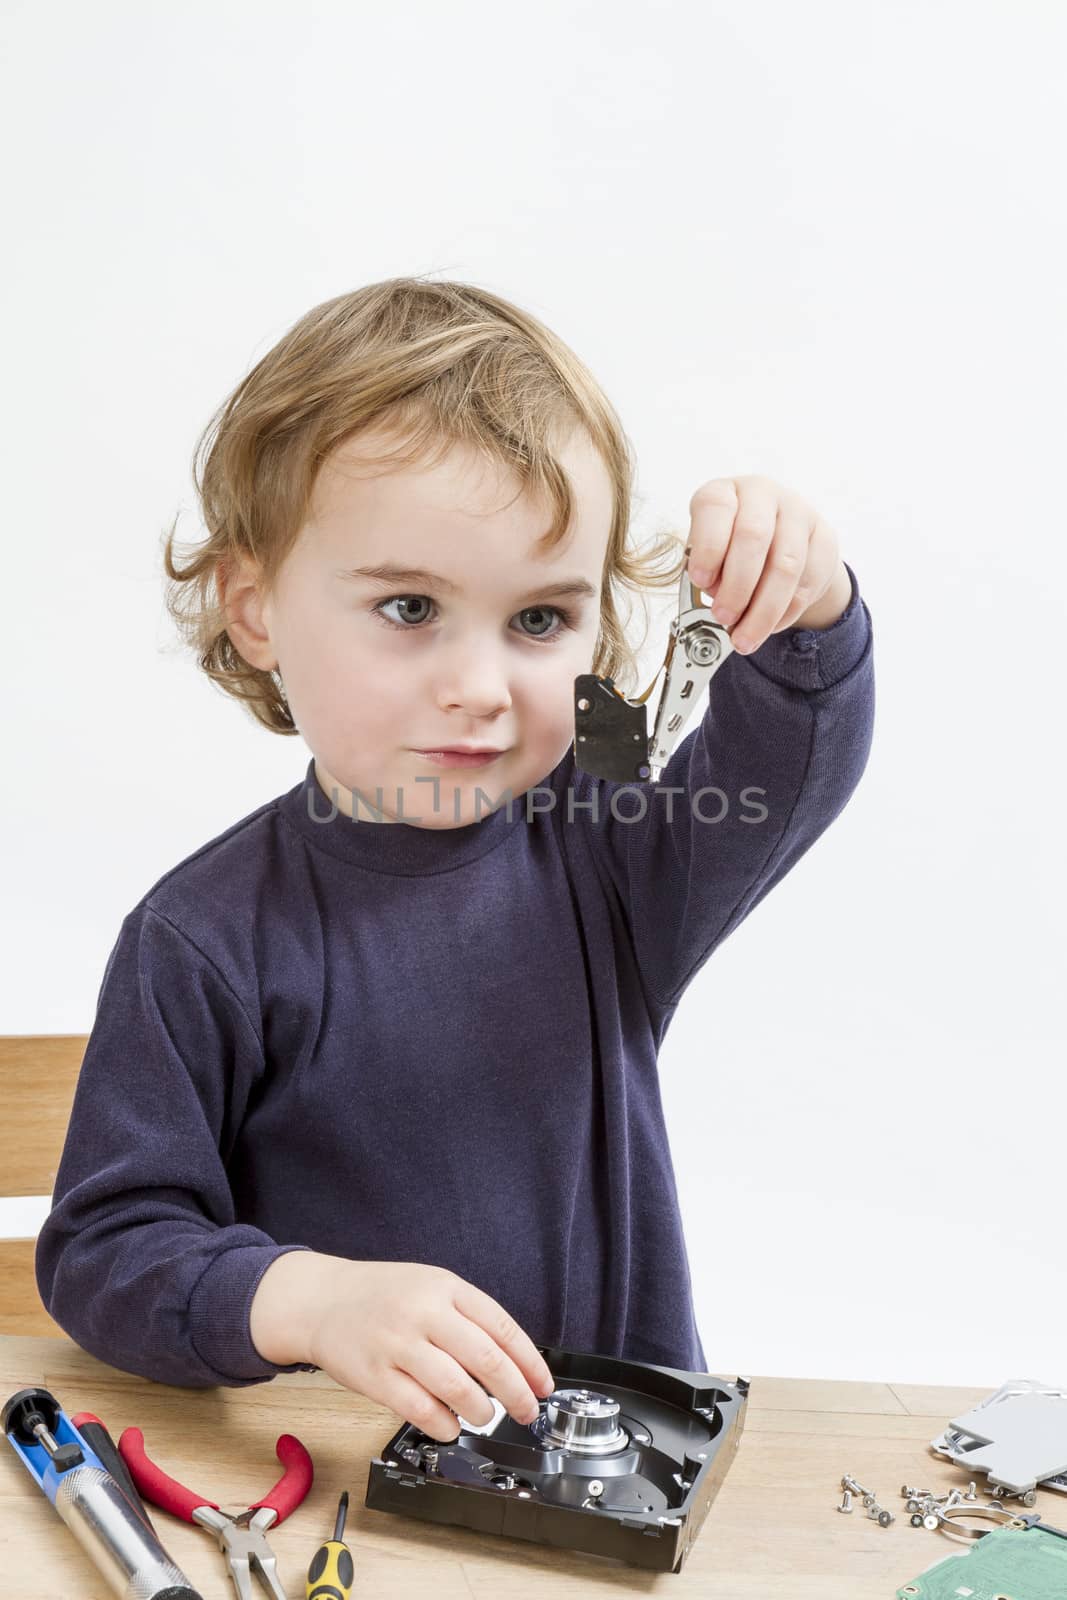 young child repairing open hard disk drive with different tools